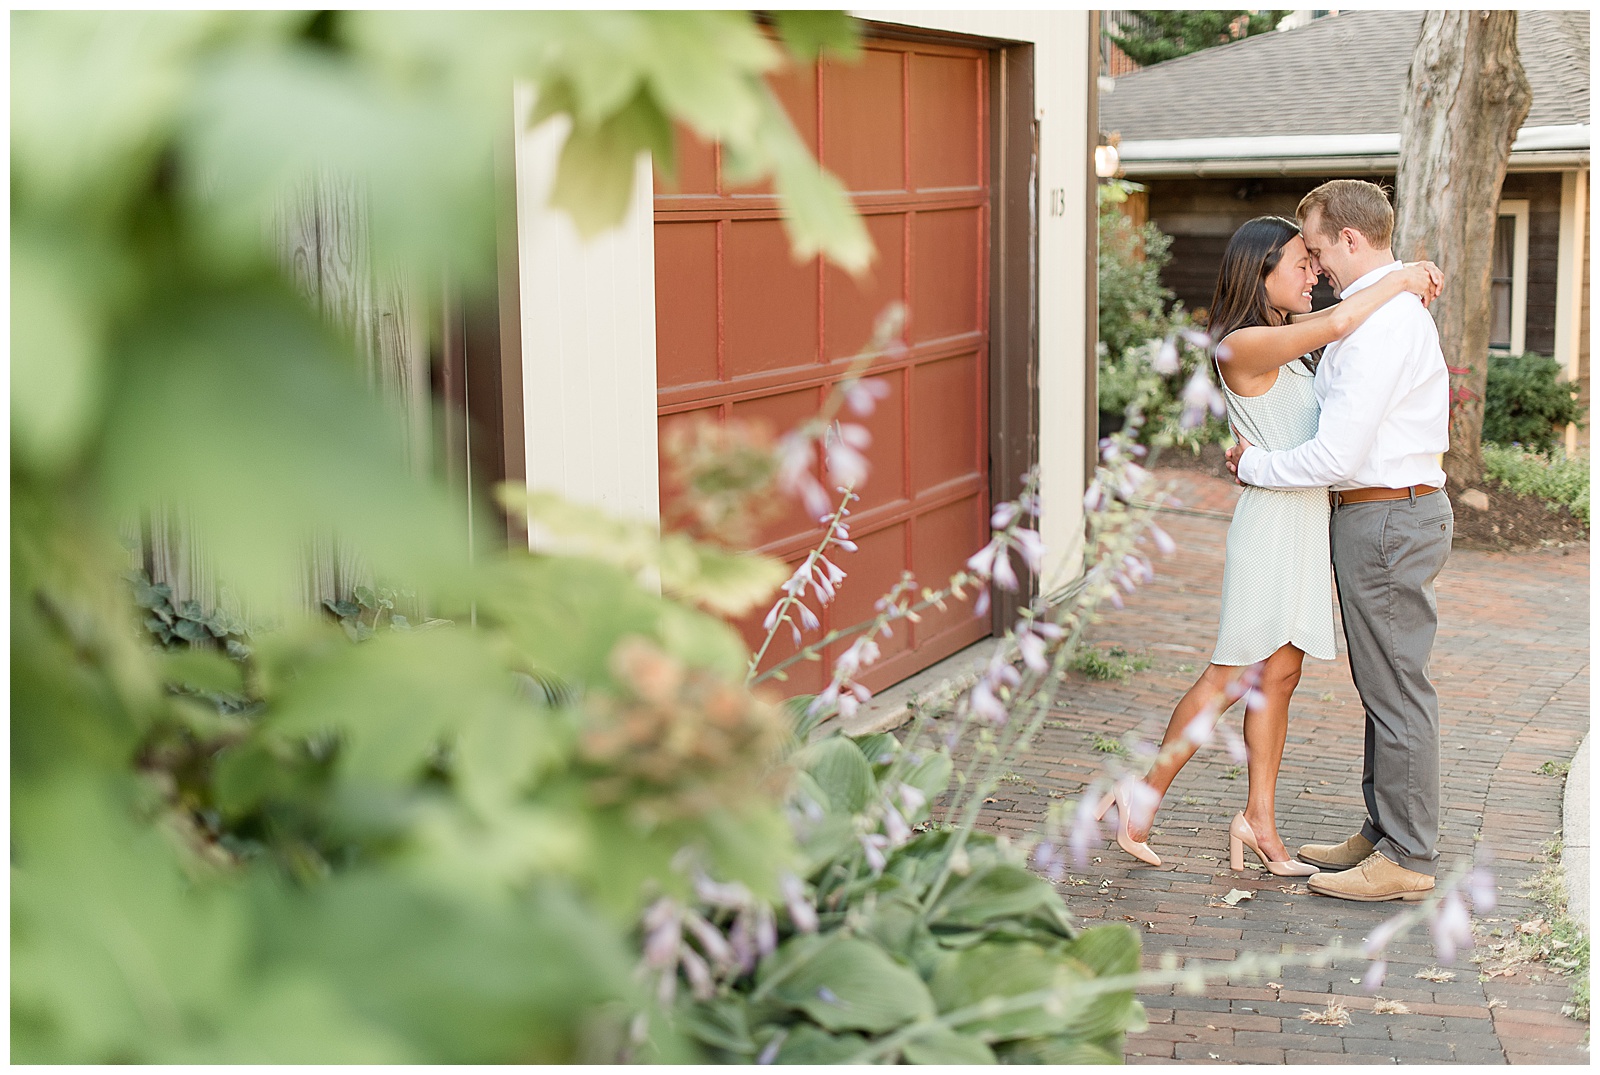 couple forehead to forehead and girls arms wrapped around his neck as the photo is taking through a floral bush